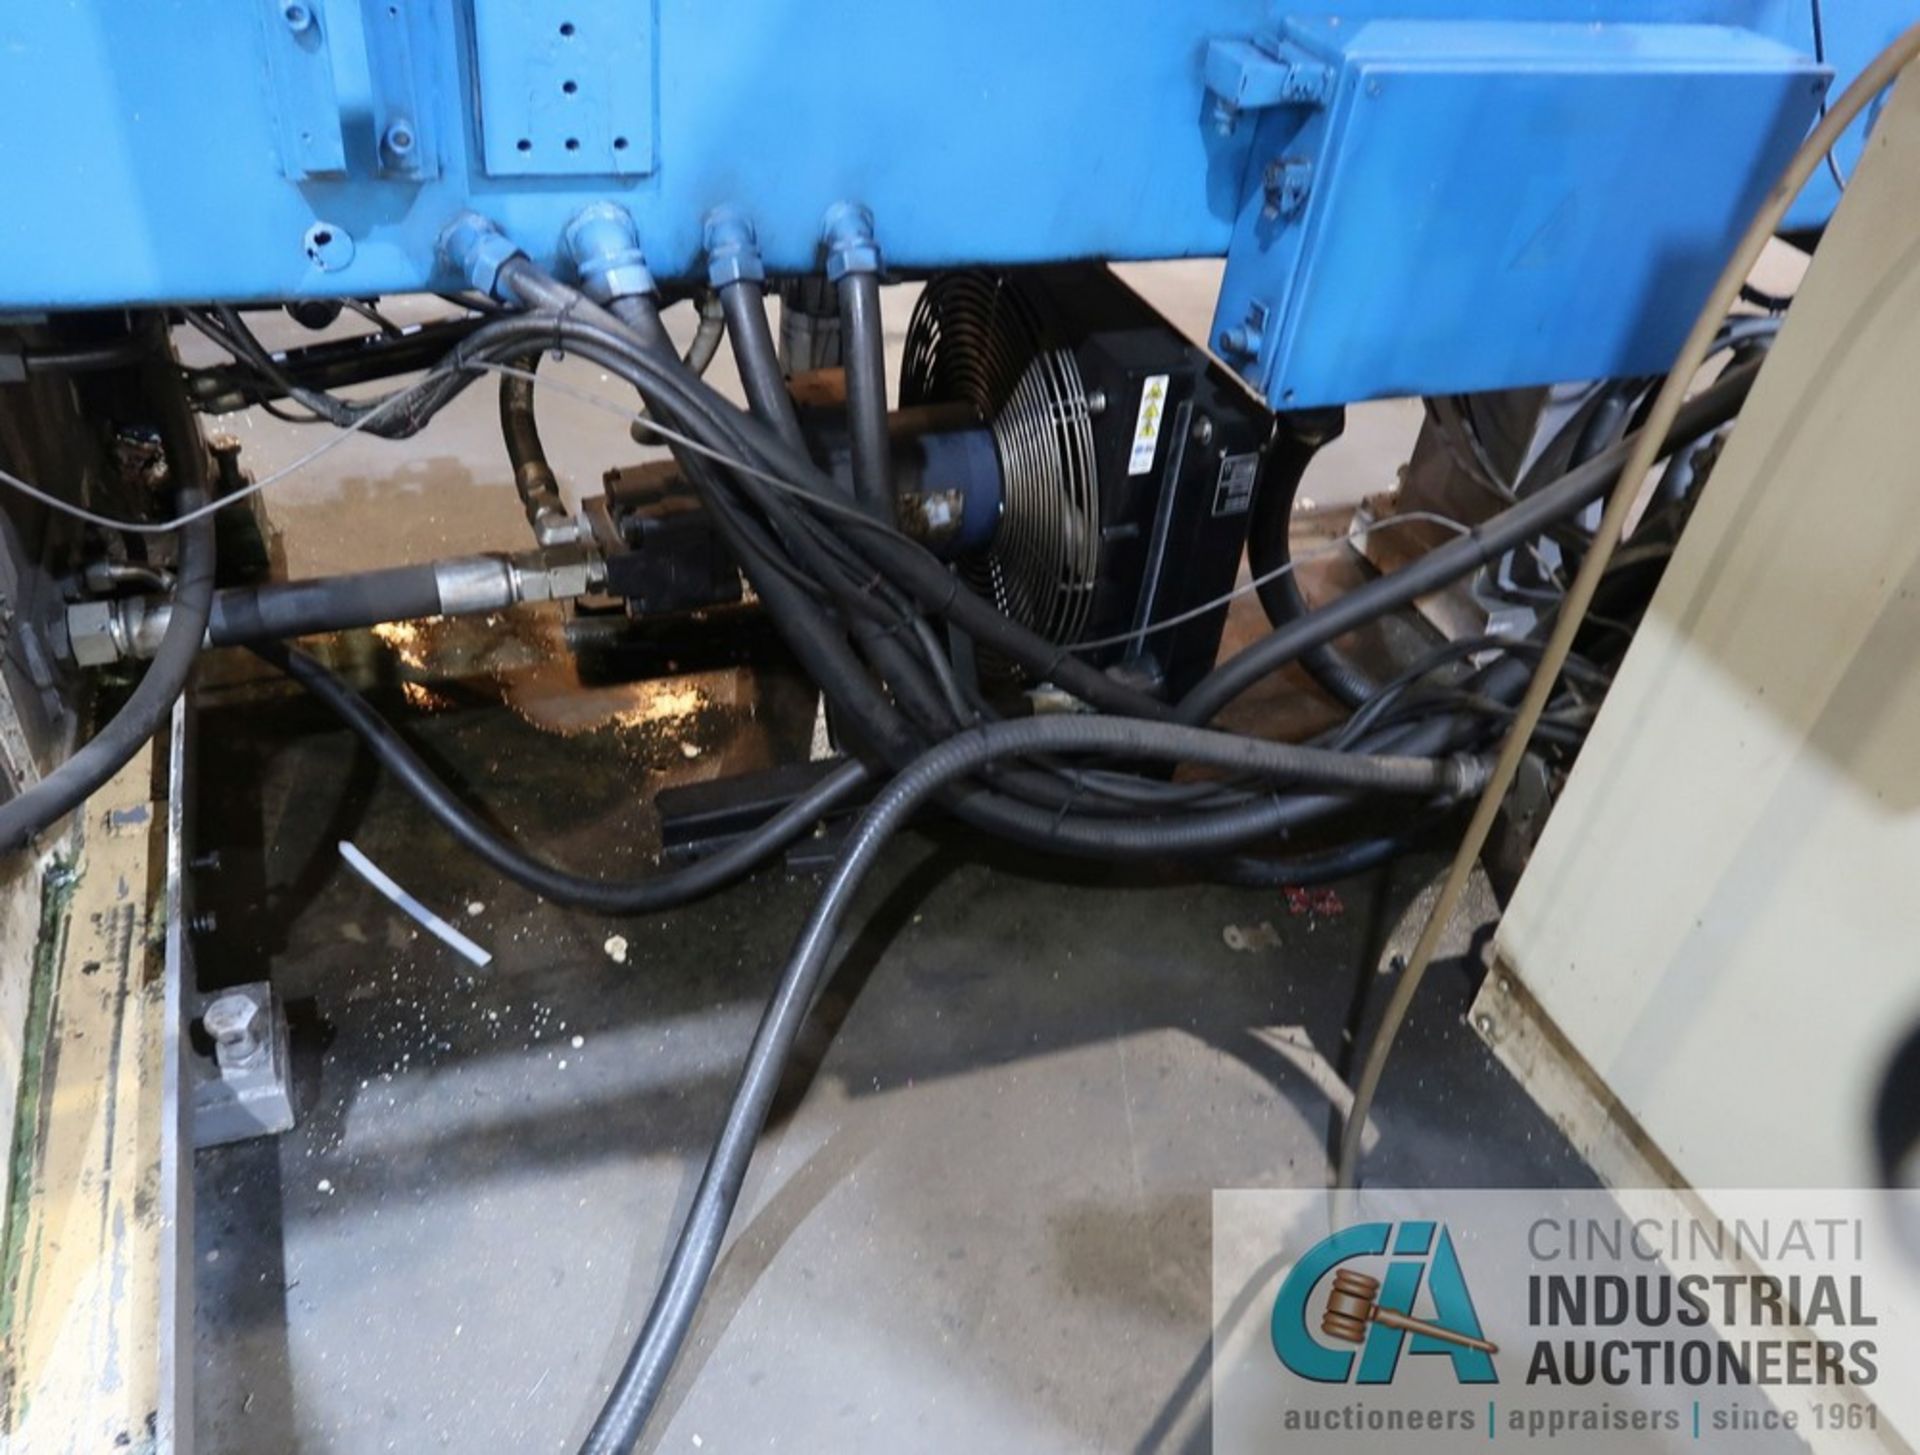 3" ADDISON MODEL DB76-TB TRAVELING BOOST CNC HYDRAULIC TUBE BENDER; S/N 10035, ASSET NO. ABCC-7, - Image 9 of 17